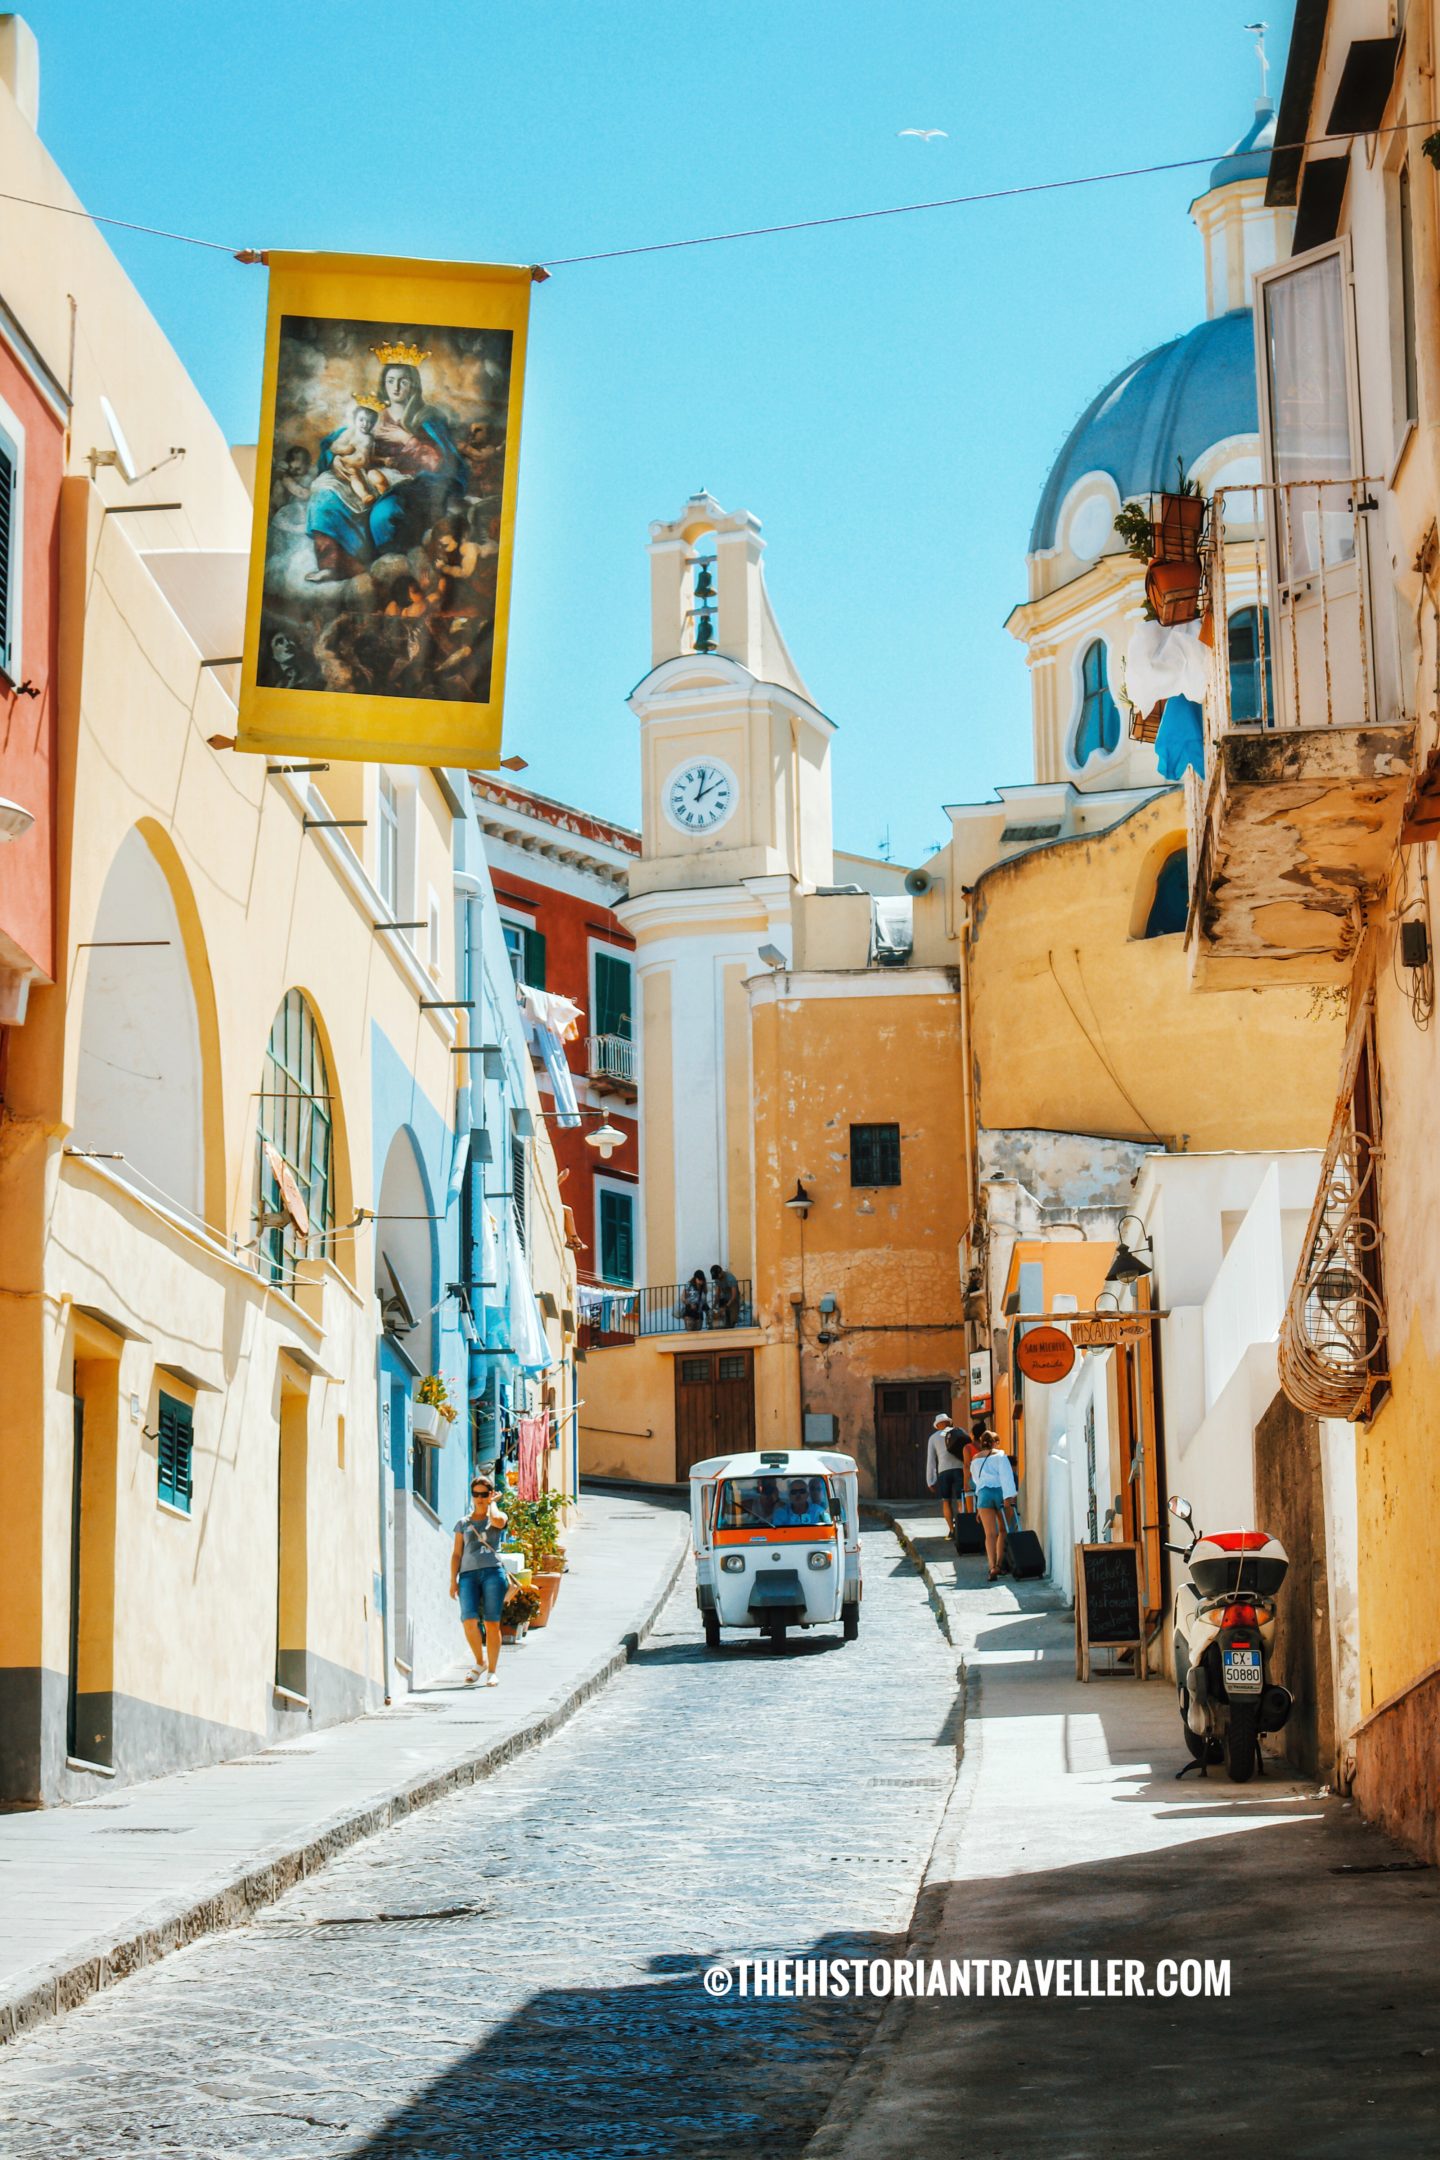 Organise a day trip to Procida